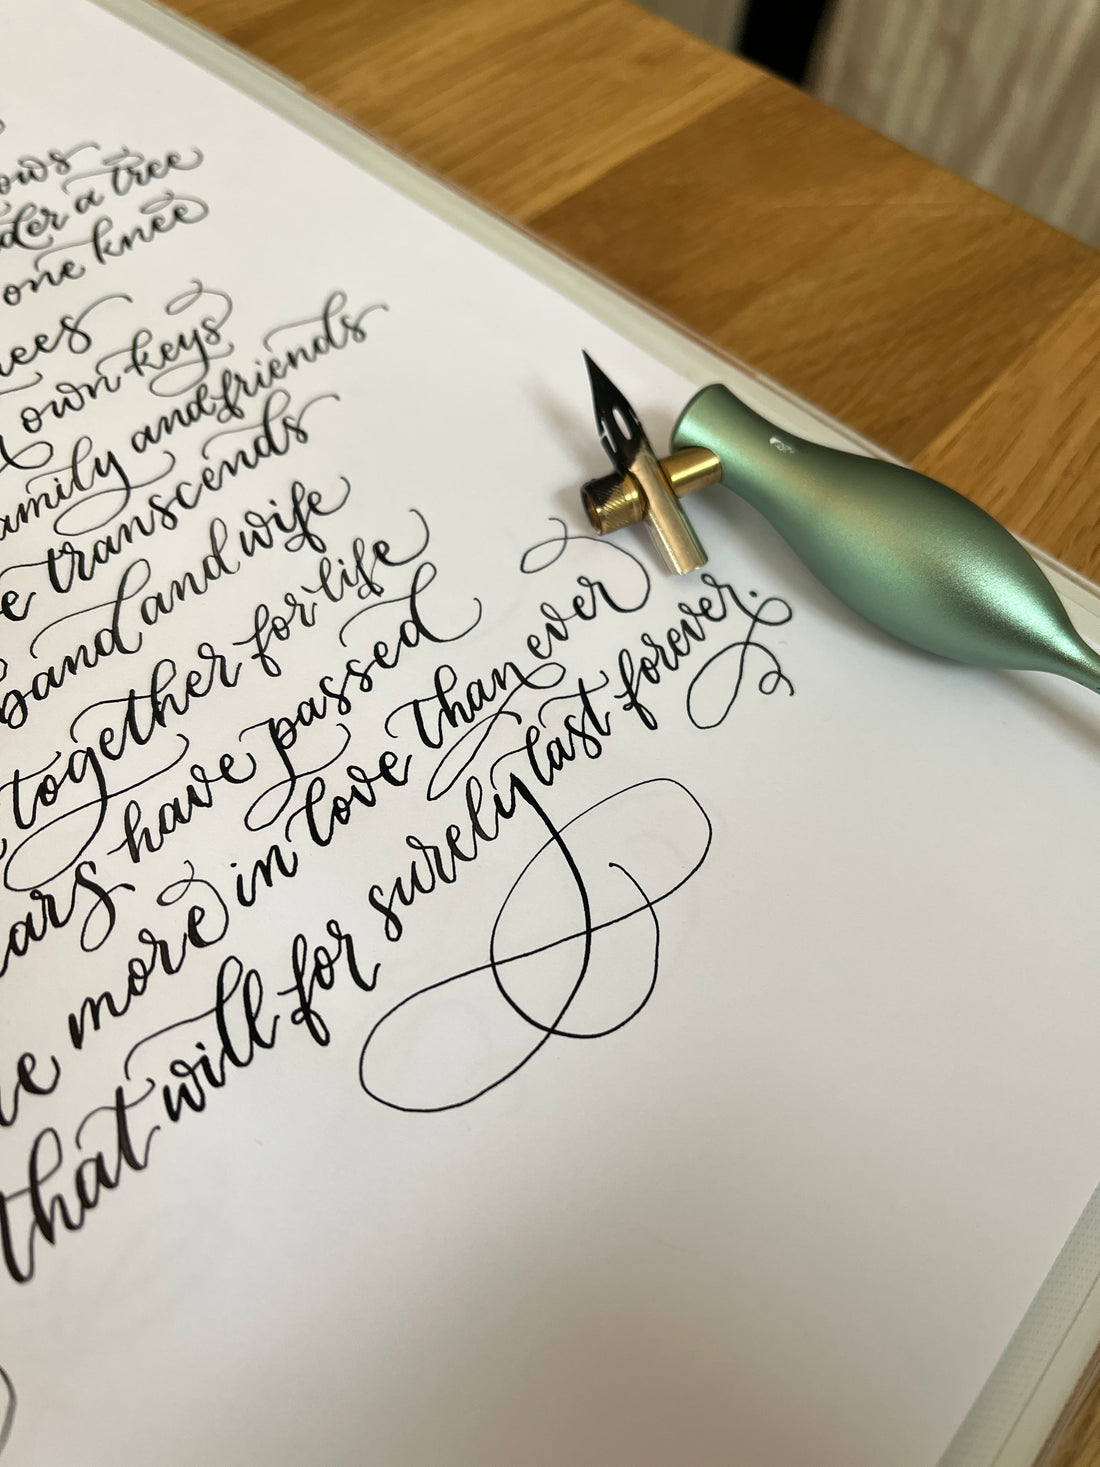 Improve your handwriting skills and learn modern calligraphy